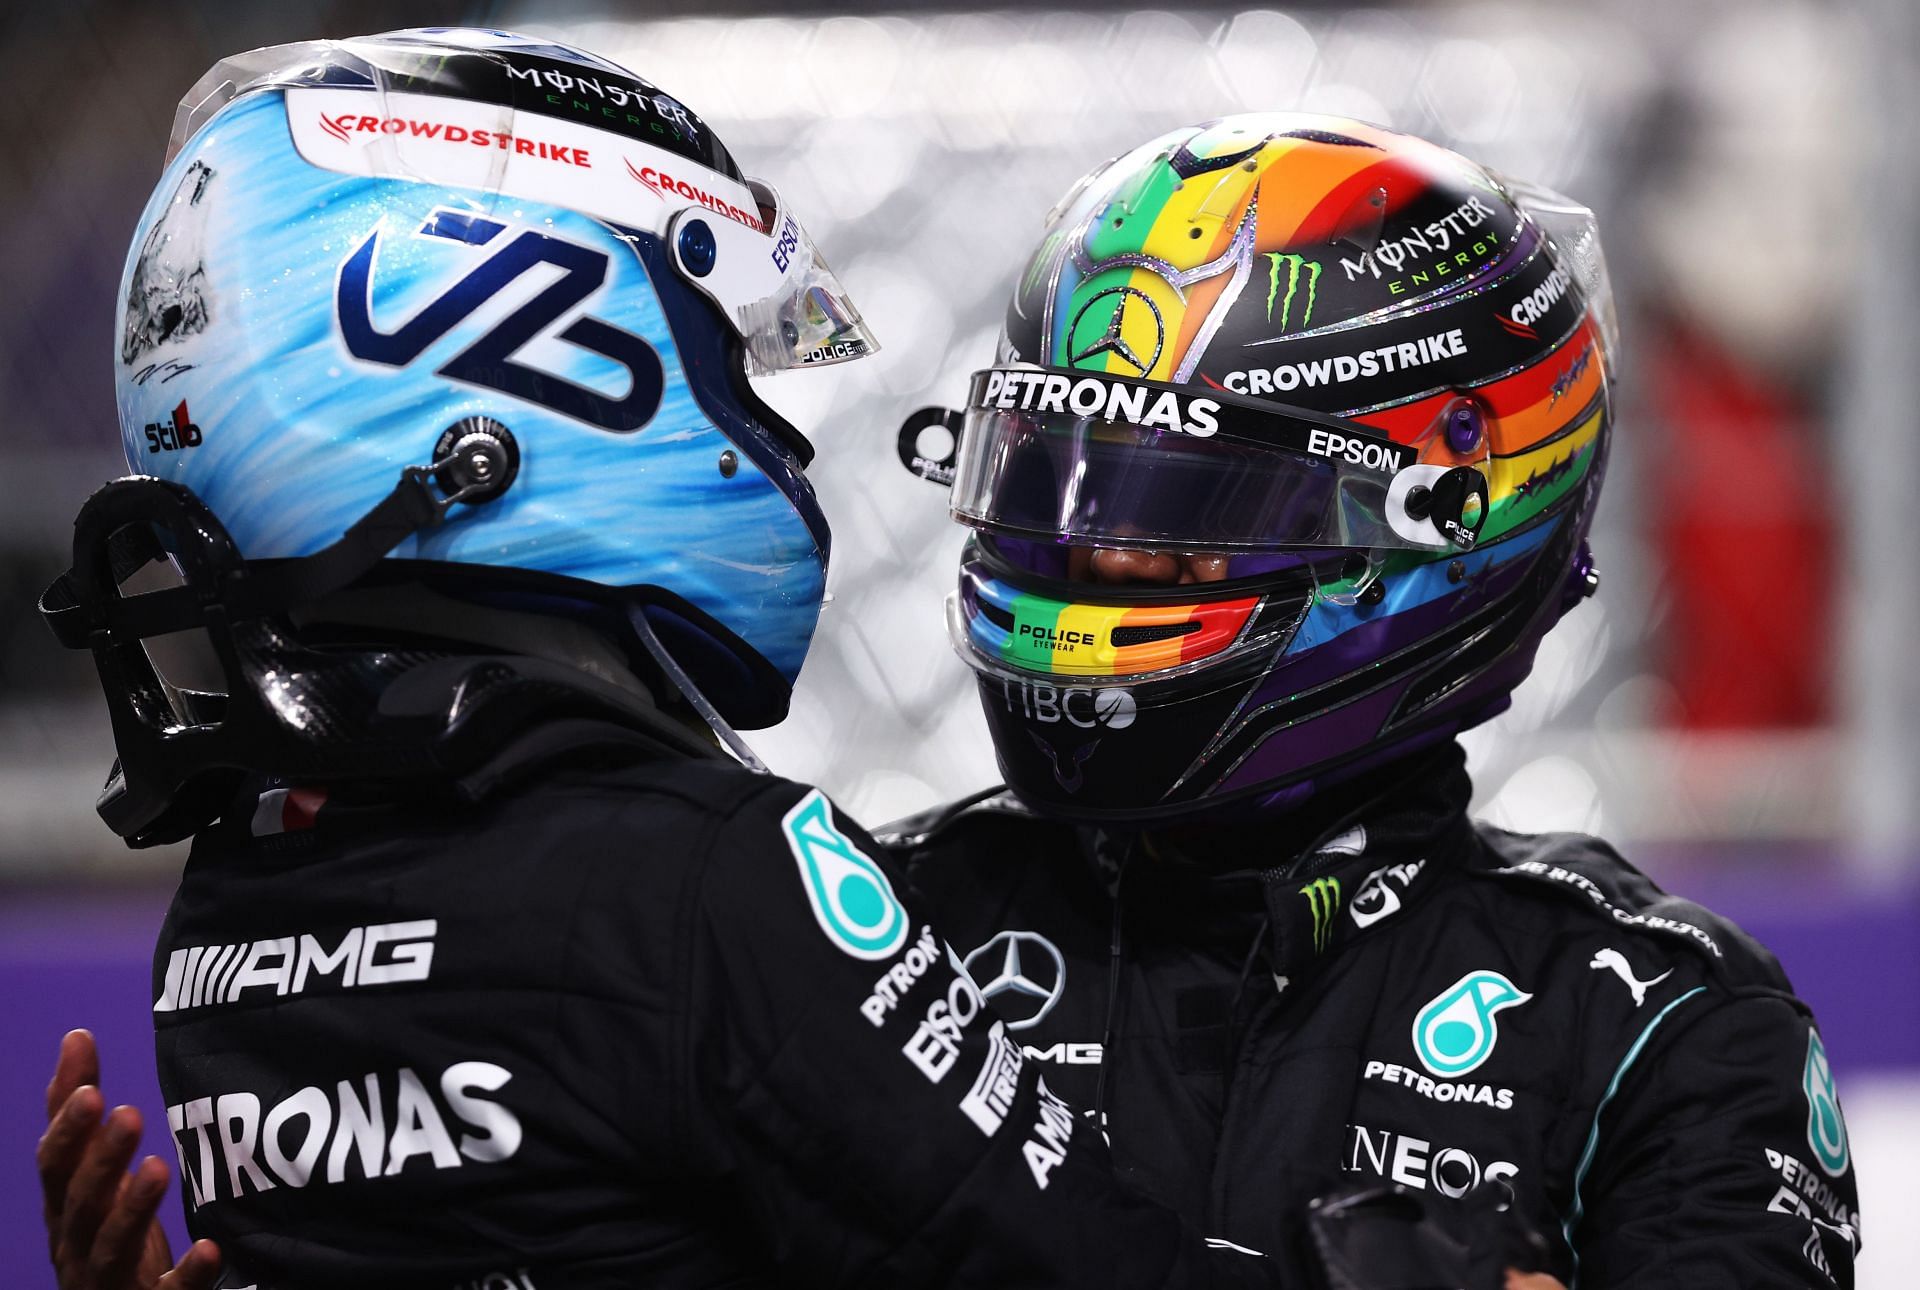 Pole position qualifier Lewis Hamiltonand second place qualifier Valtteri Bottas celebrate in parc ferme during qualifying ahead of the 2021 Saudi Arabian Grand Prix. (Photo by Lars Baron/Getty Images)